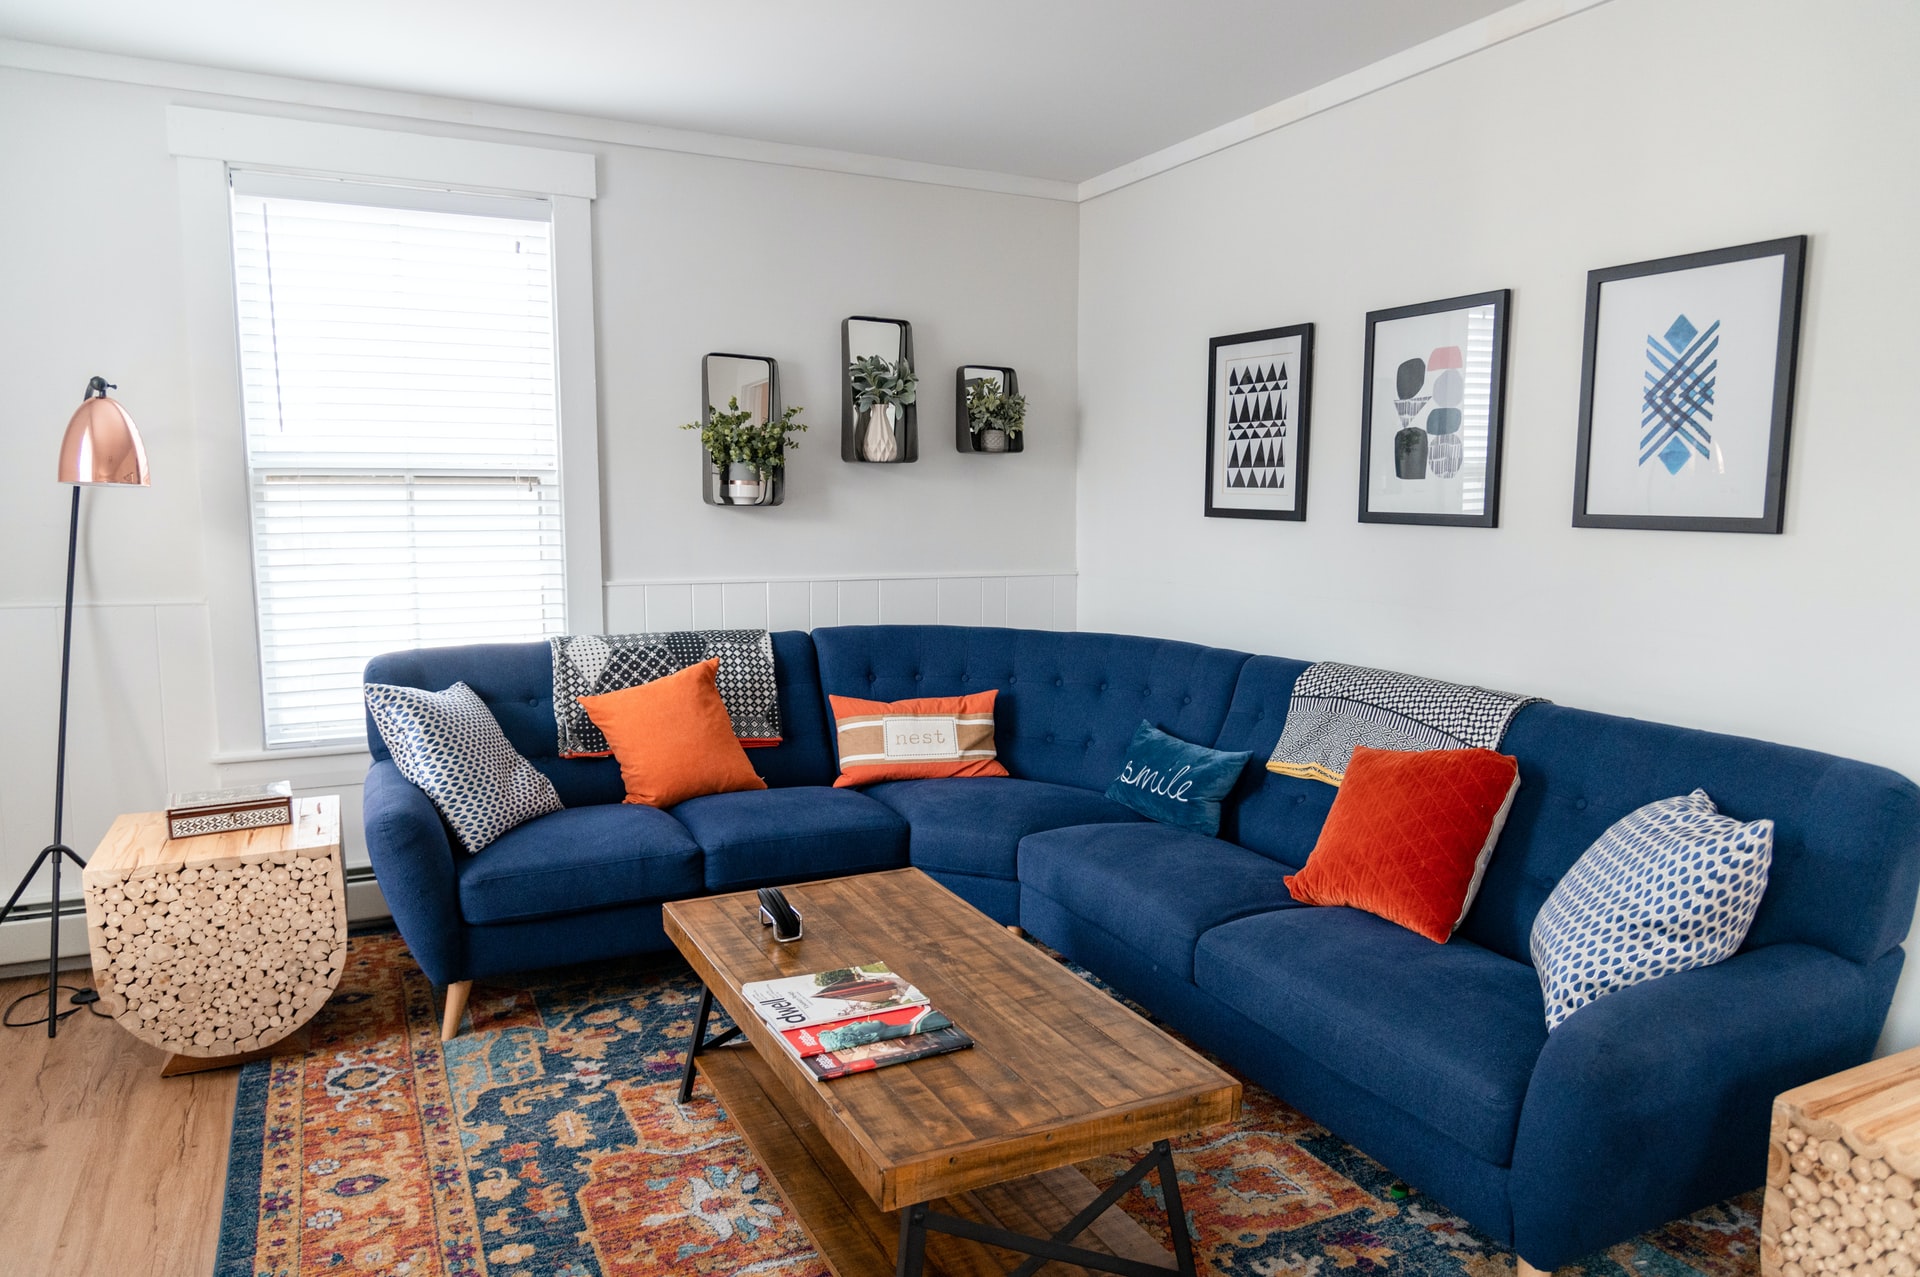 tag: a living room with a blue sectional and white walls